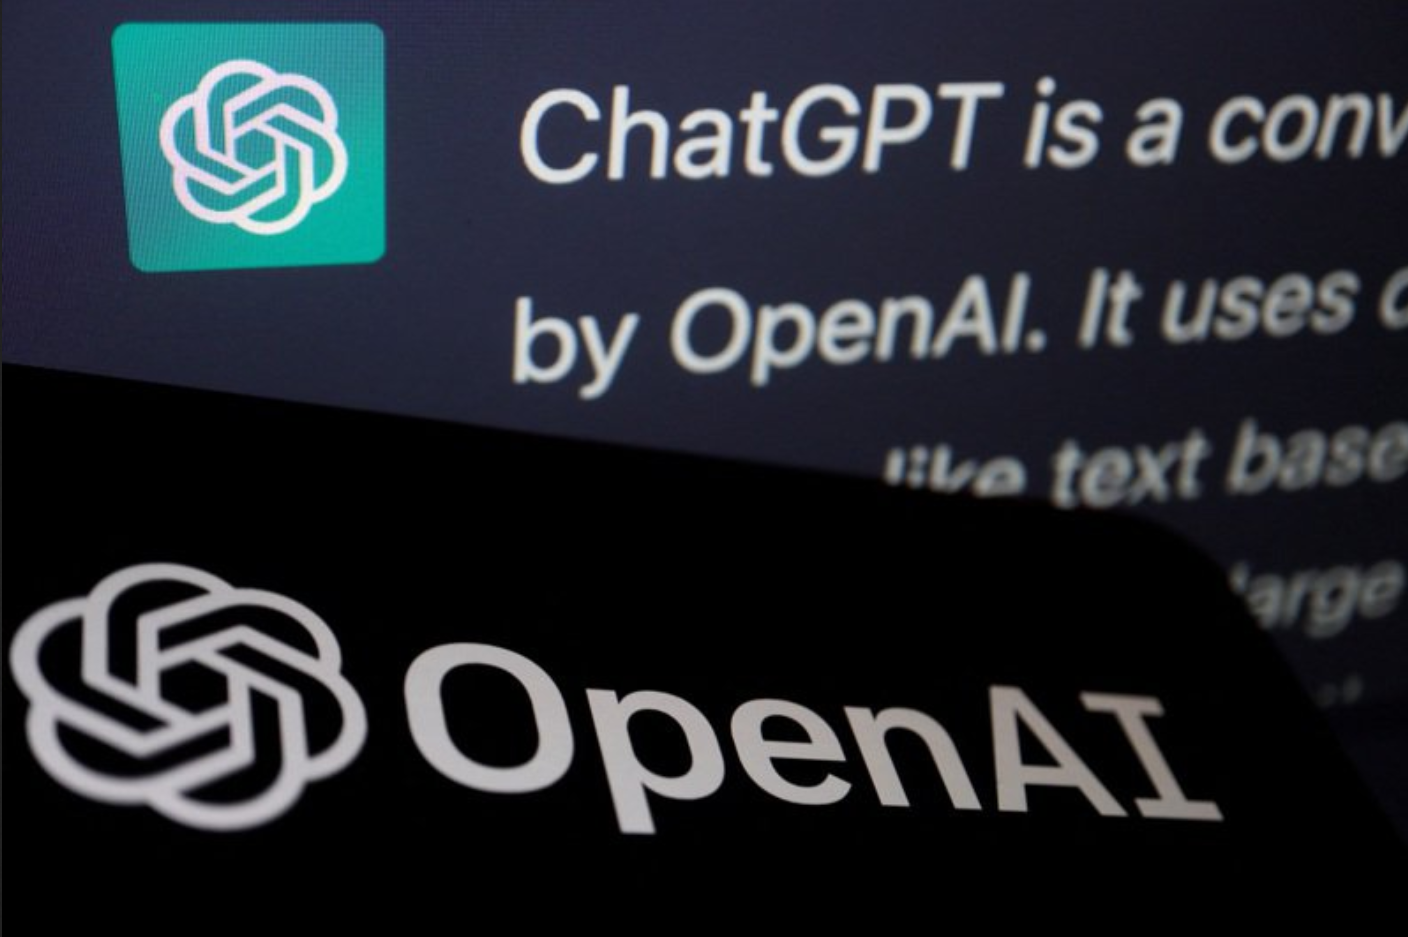 What is ChatGPT? And How to use it - Full Explained